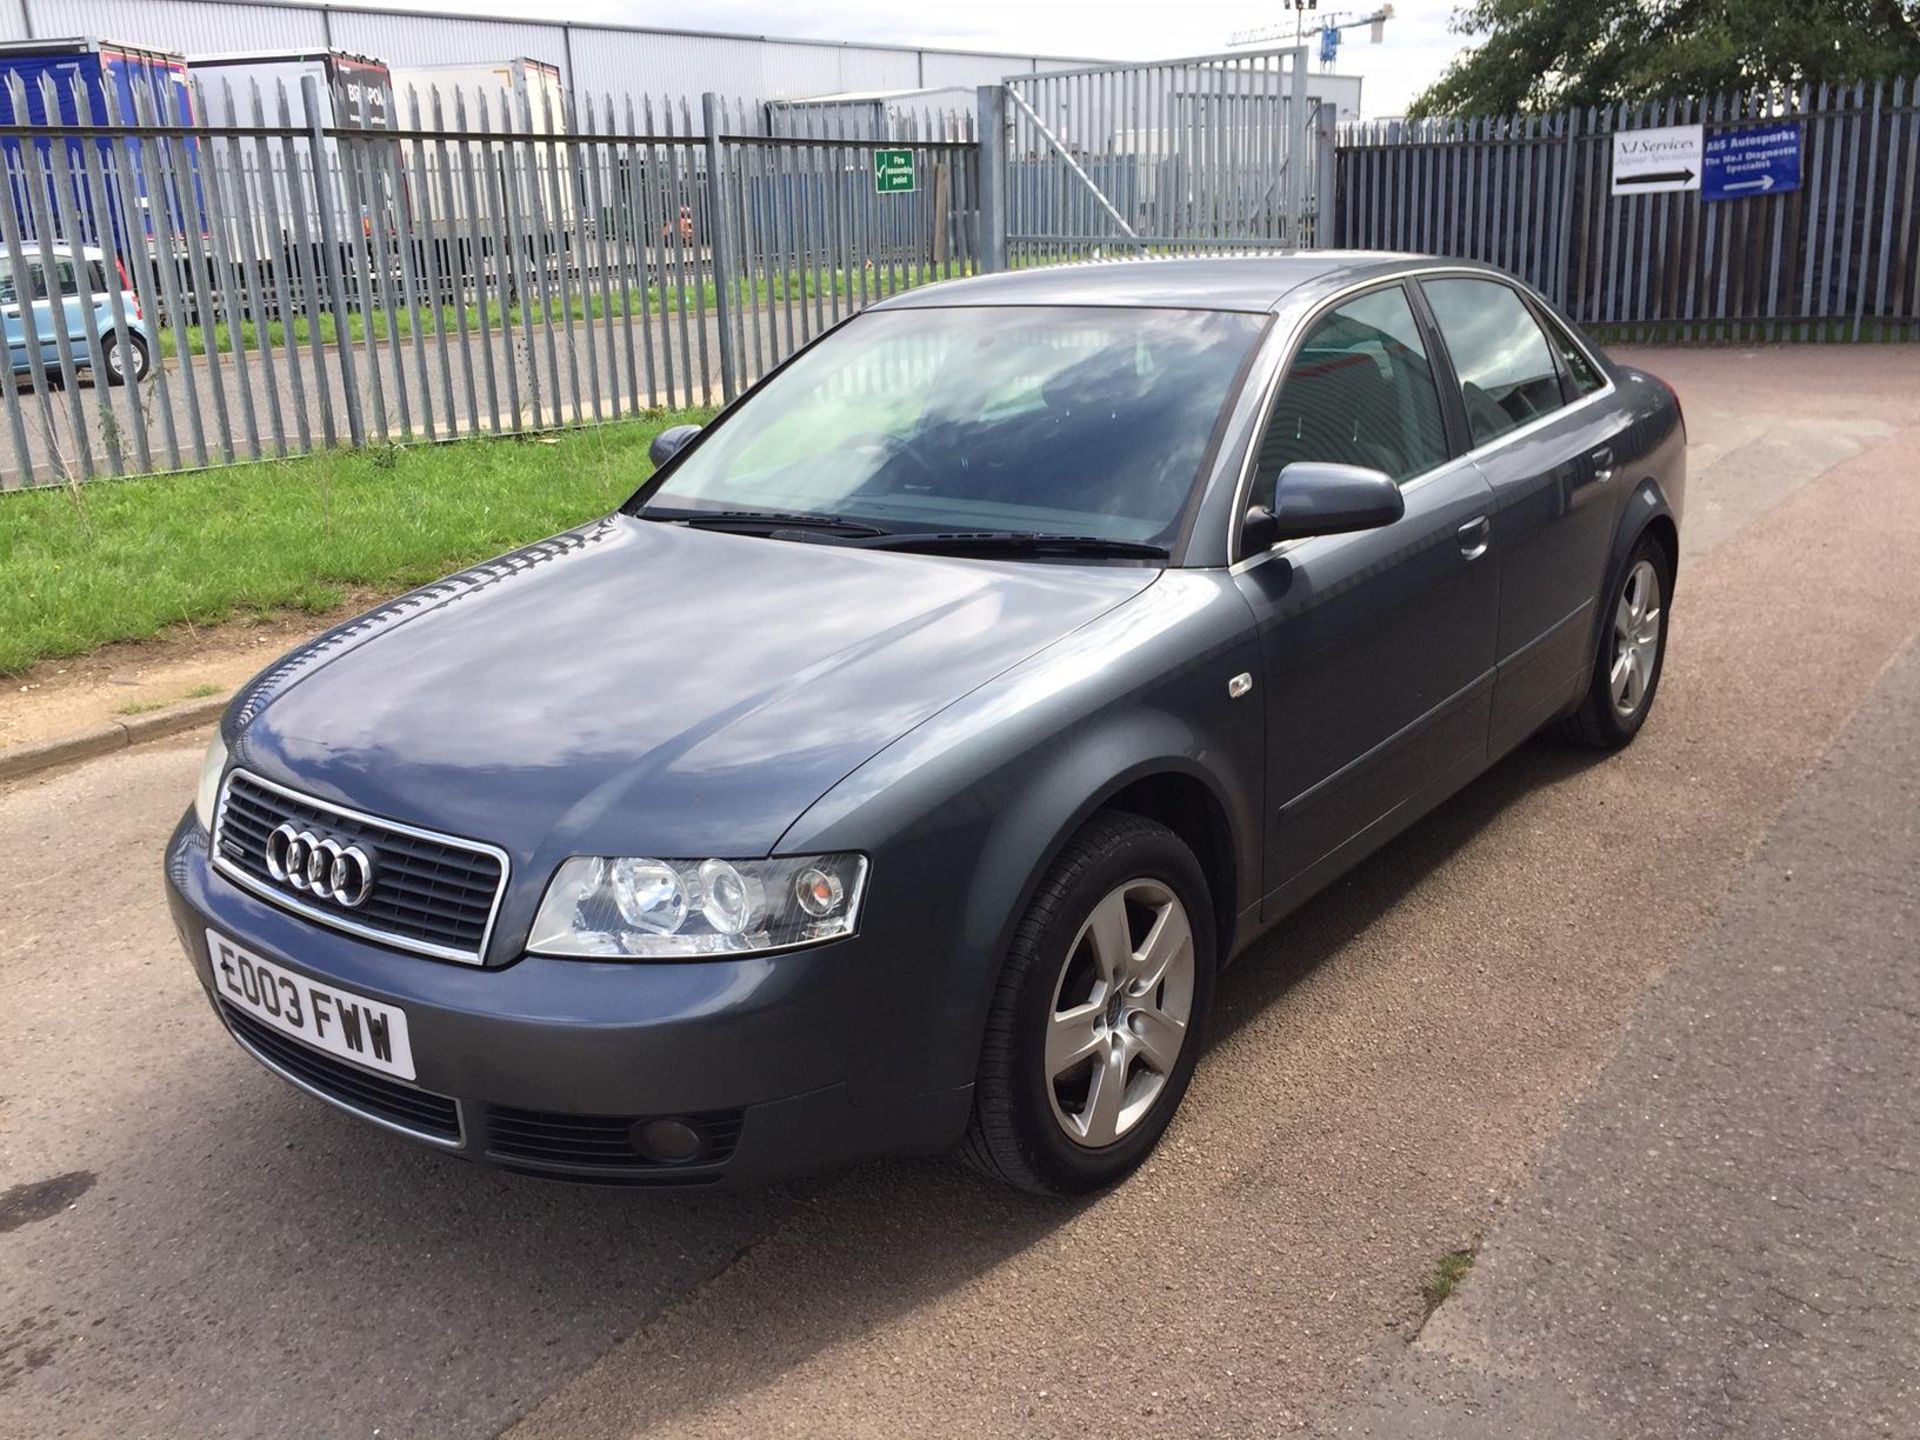 2003 Audi A4 Quattro 1.9 Tdi SE 4 Dr Saloon - CL505 - NO VAT ON THE HAMMER - Location: Corby, Northa - Image 3 of 15